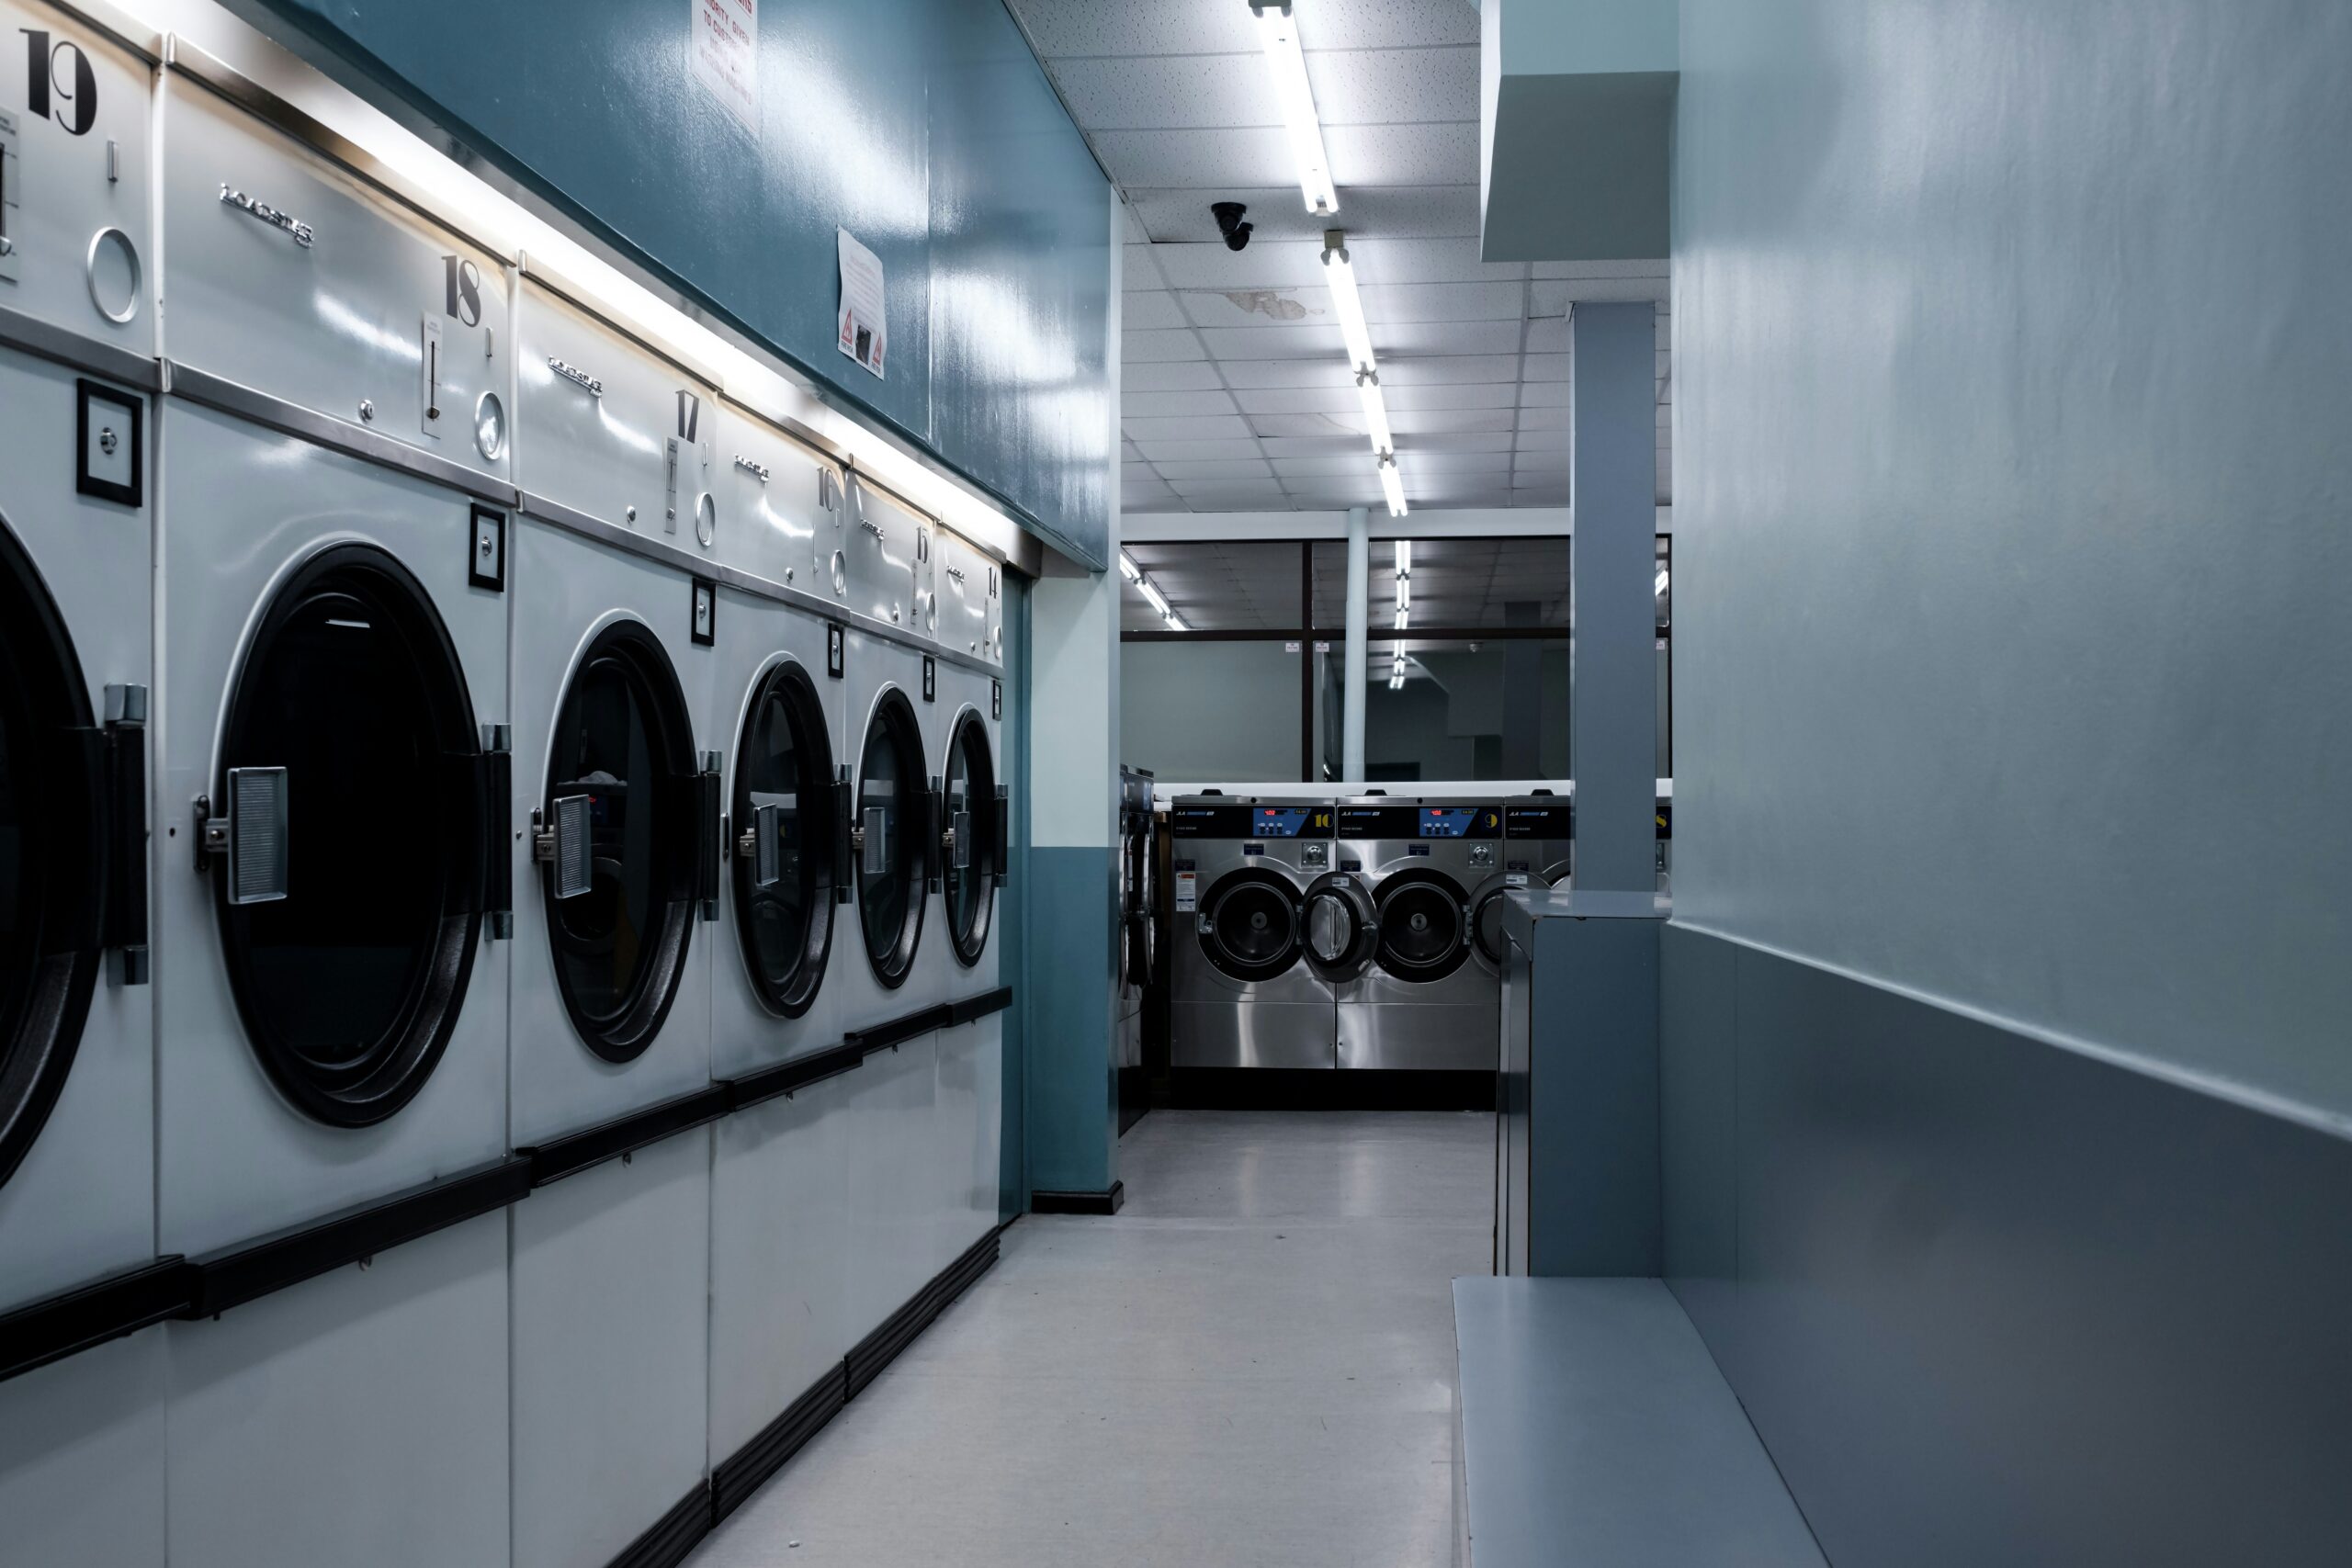 Why you should use commercial laundry equipment is required for housing laundry rooms